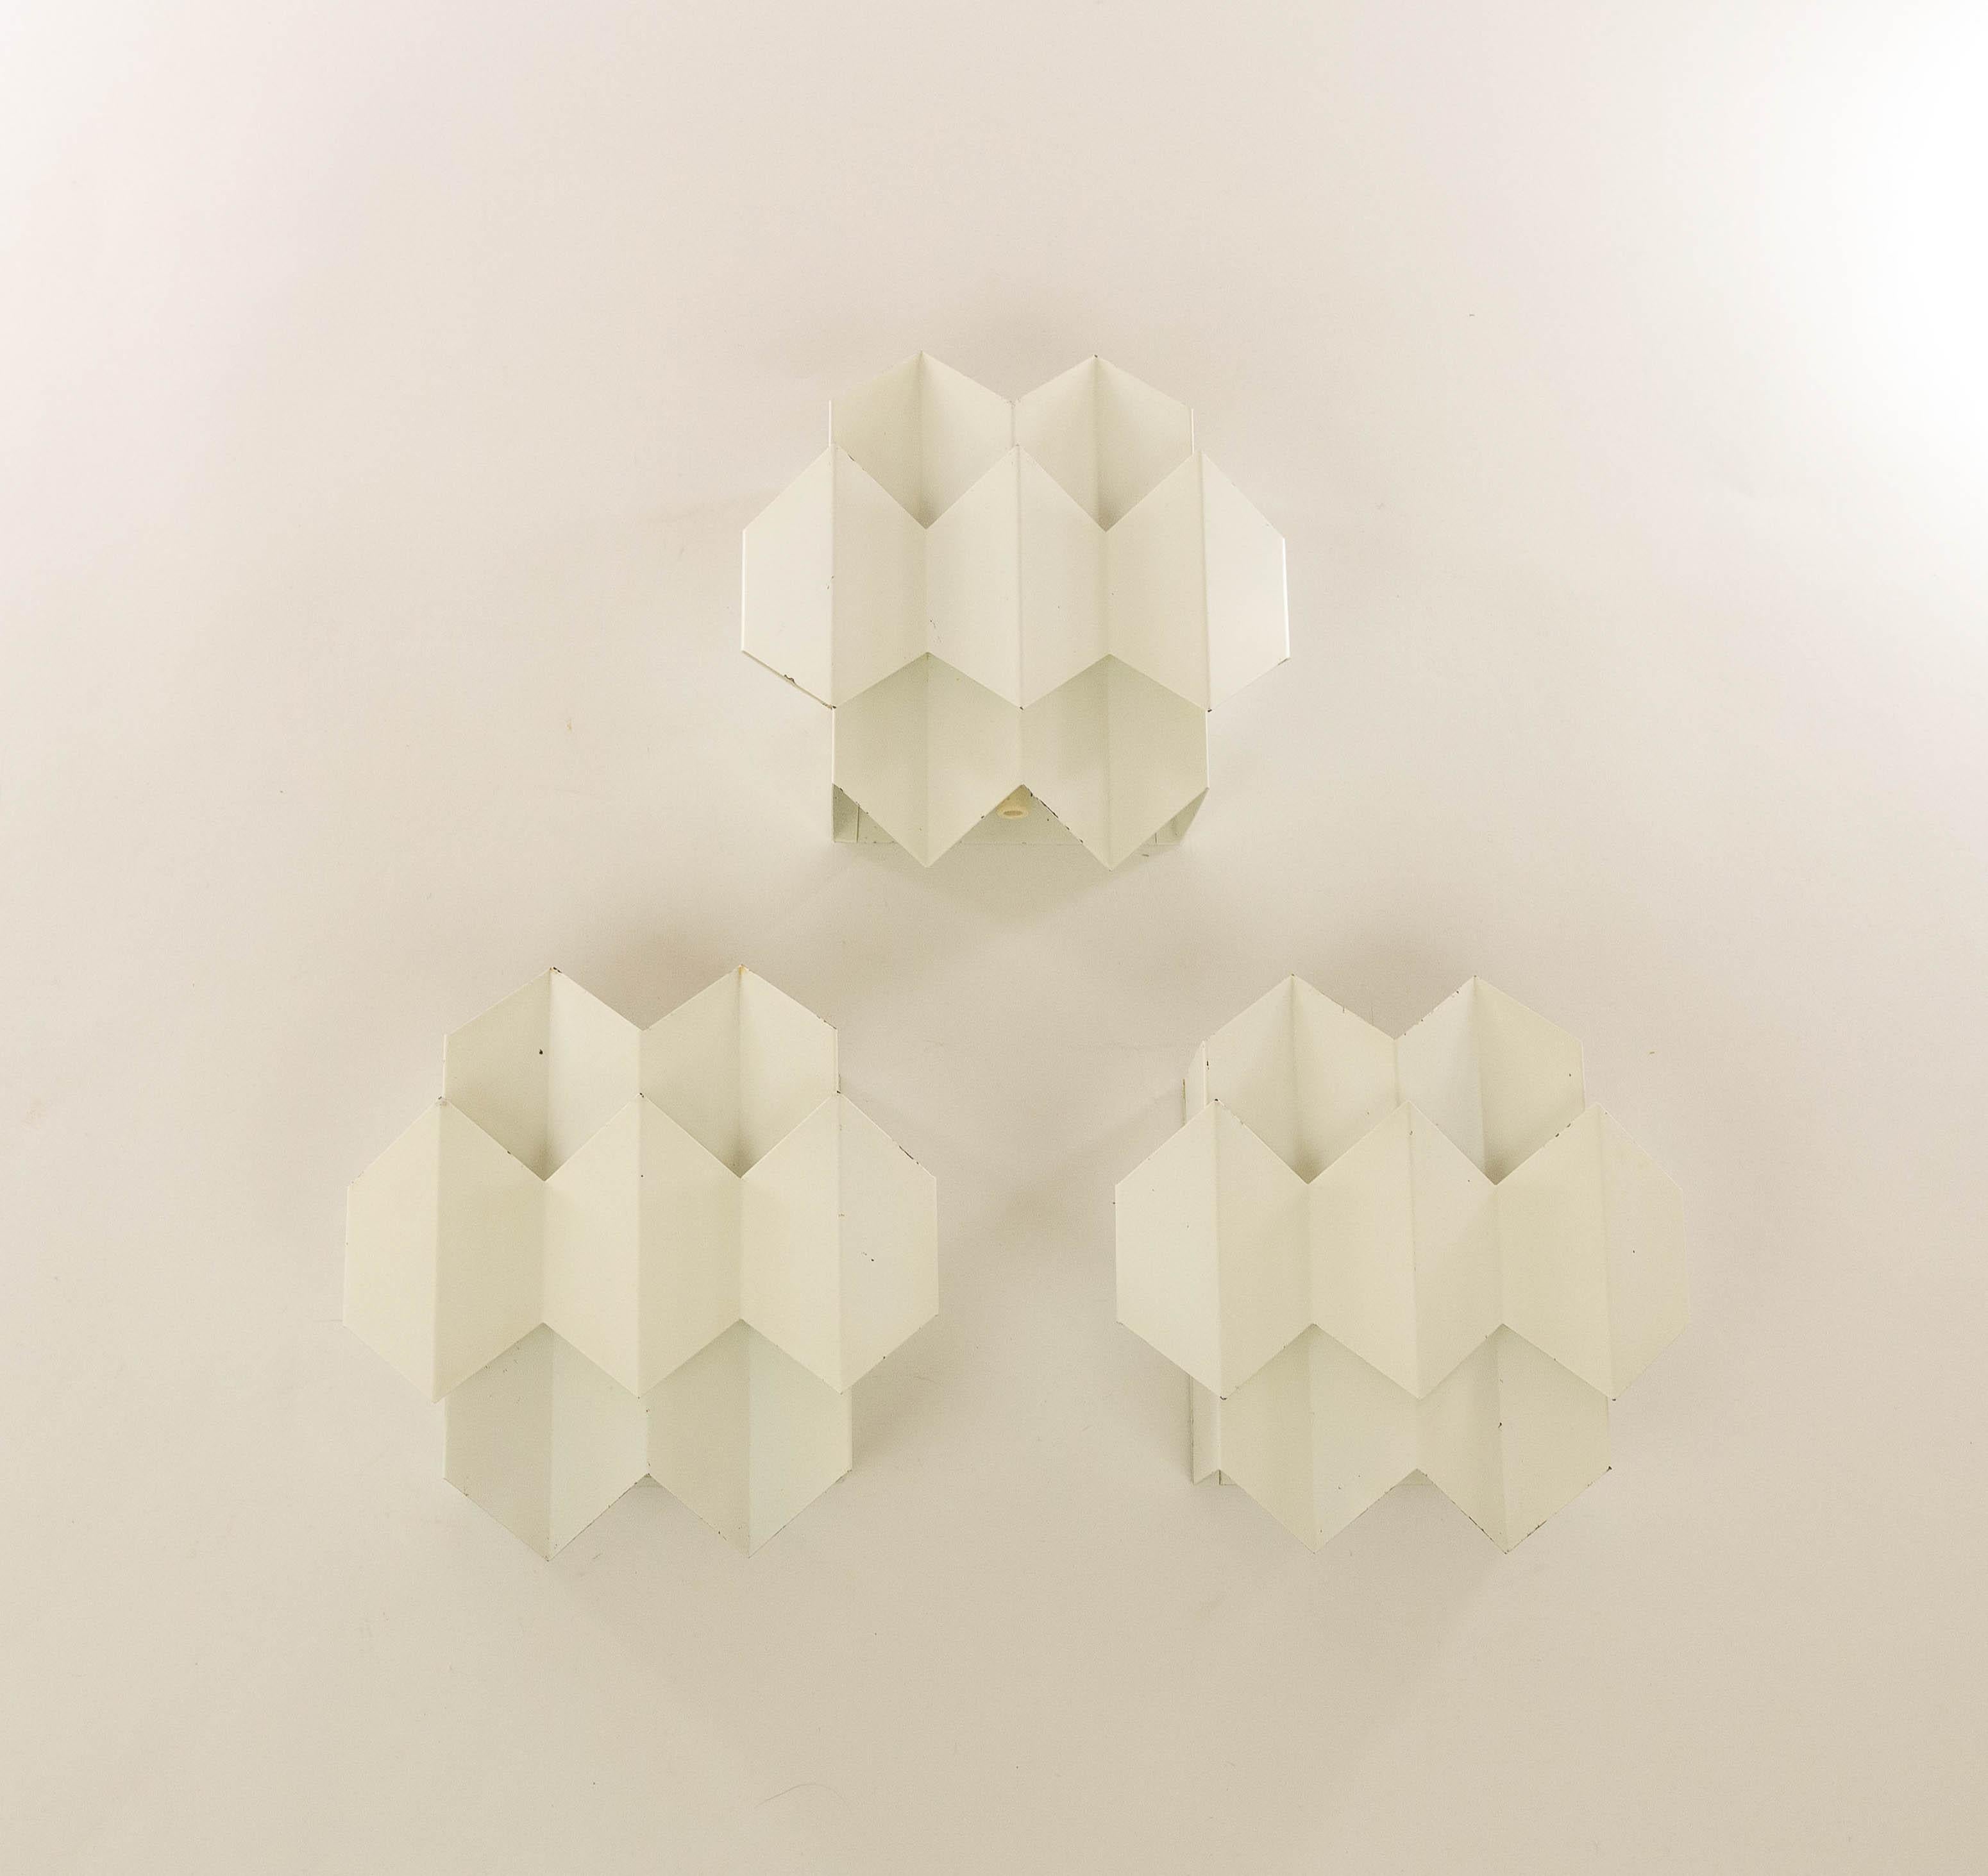 Set of three white geometrical Septet wall lamps designed by Bent Karlby and manufactured by Lyfa, Denmark.

Two layers of bent sheet metal playfully form seven hexagons, which gave the model its name: Septet. The bent layers are mounted on a